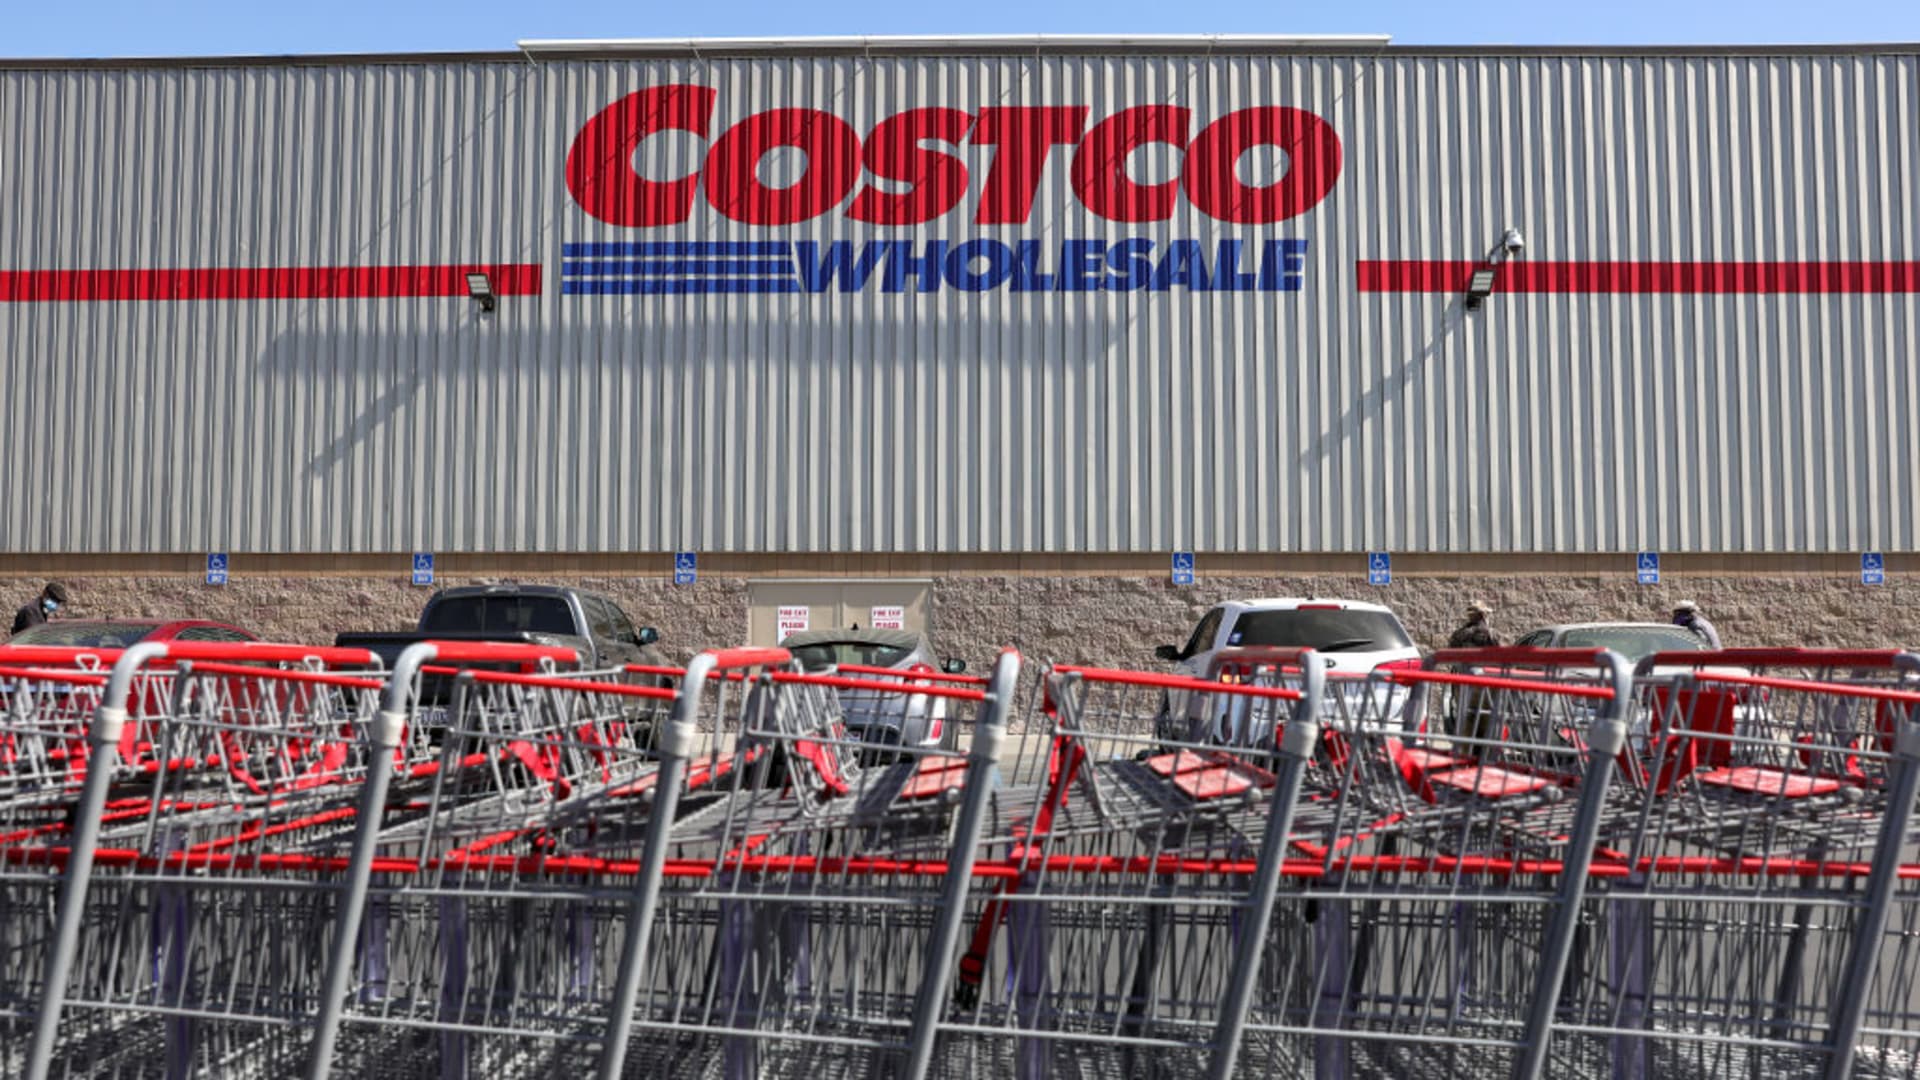 Costco's quarterly results indicate the retailer is thriving despite high inflation - CNBC